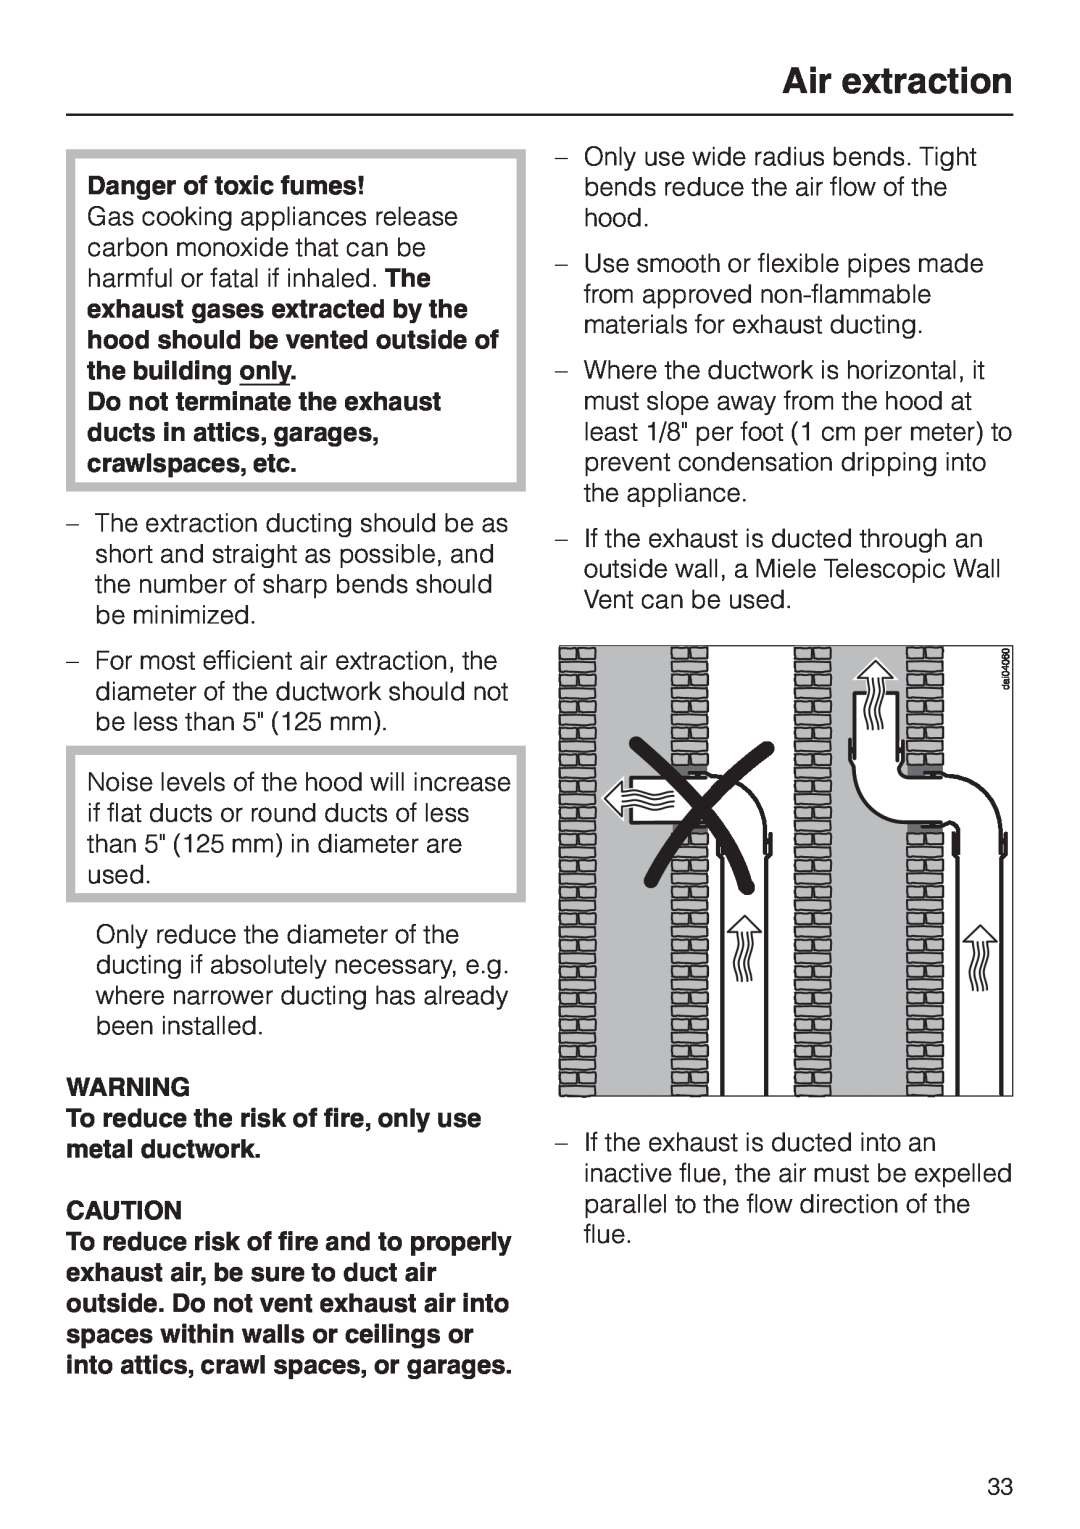 Miele DA362-110 installation instructions Air extraction, Danger of toxic fumes 